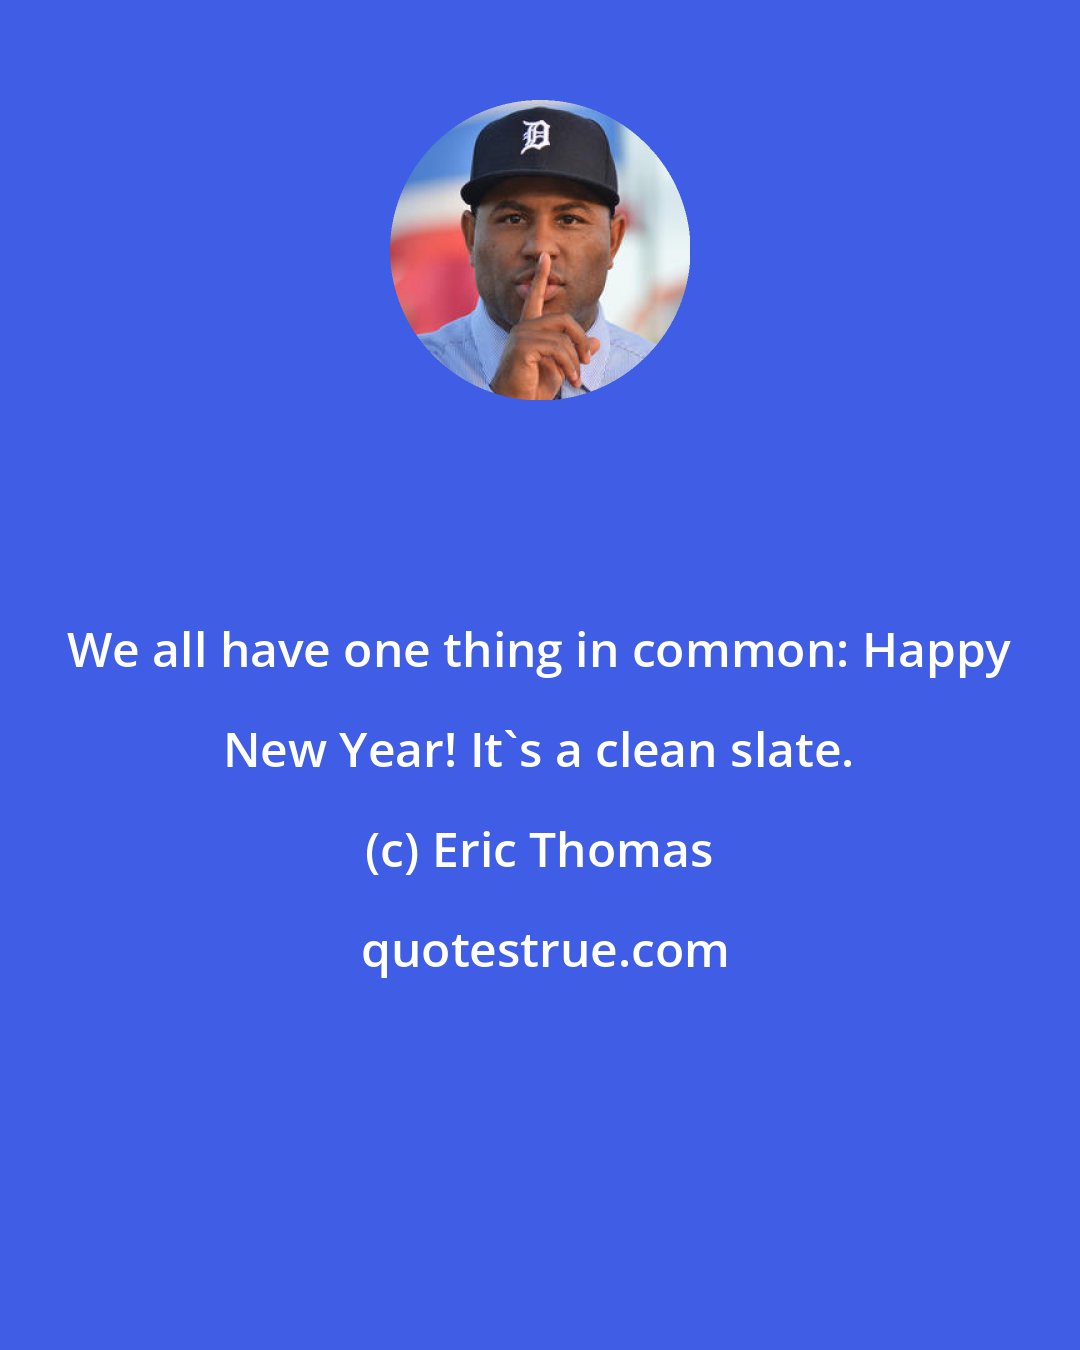 Eric Thomas: We all have one thing in common: Happy New Year! It's a clean slate.